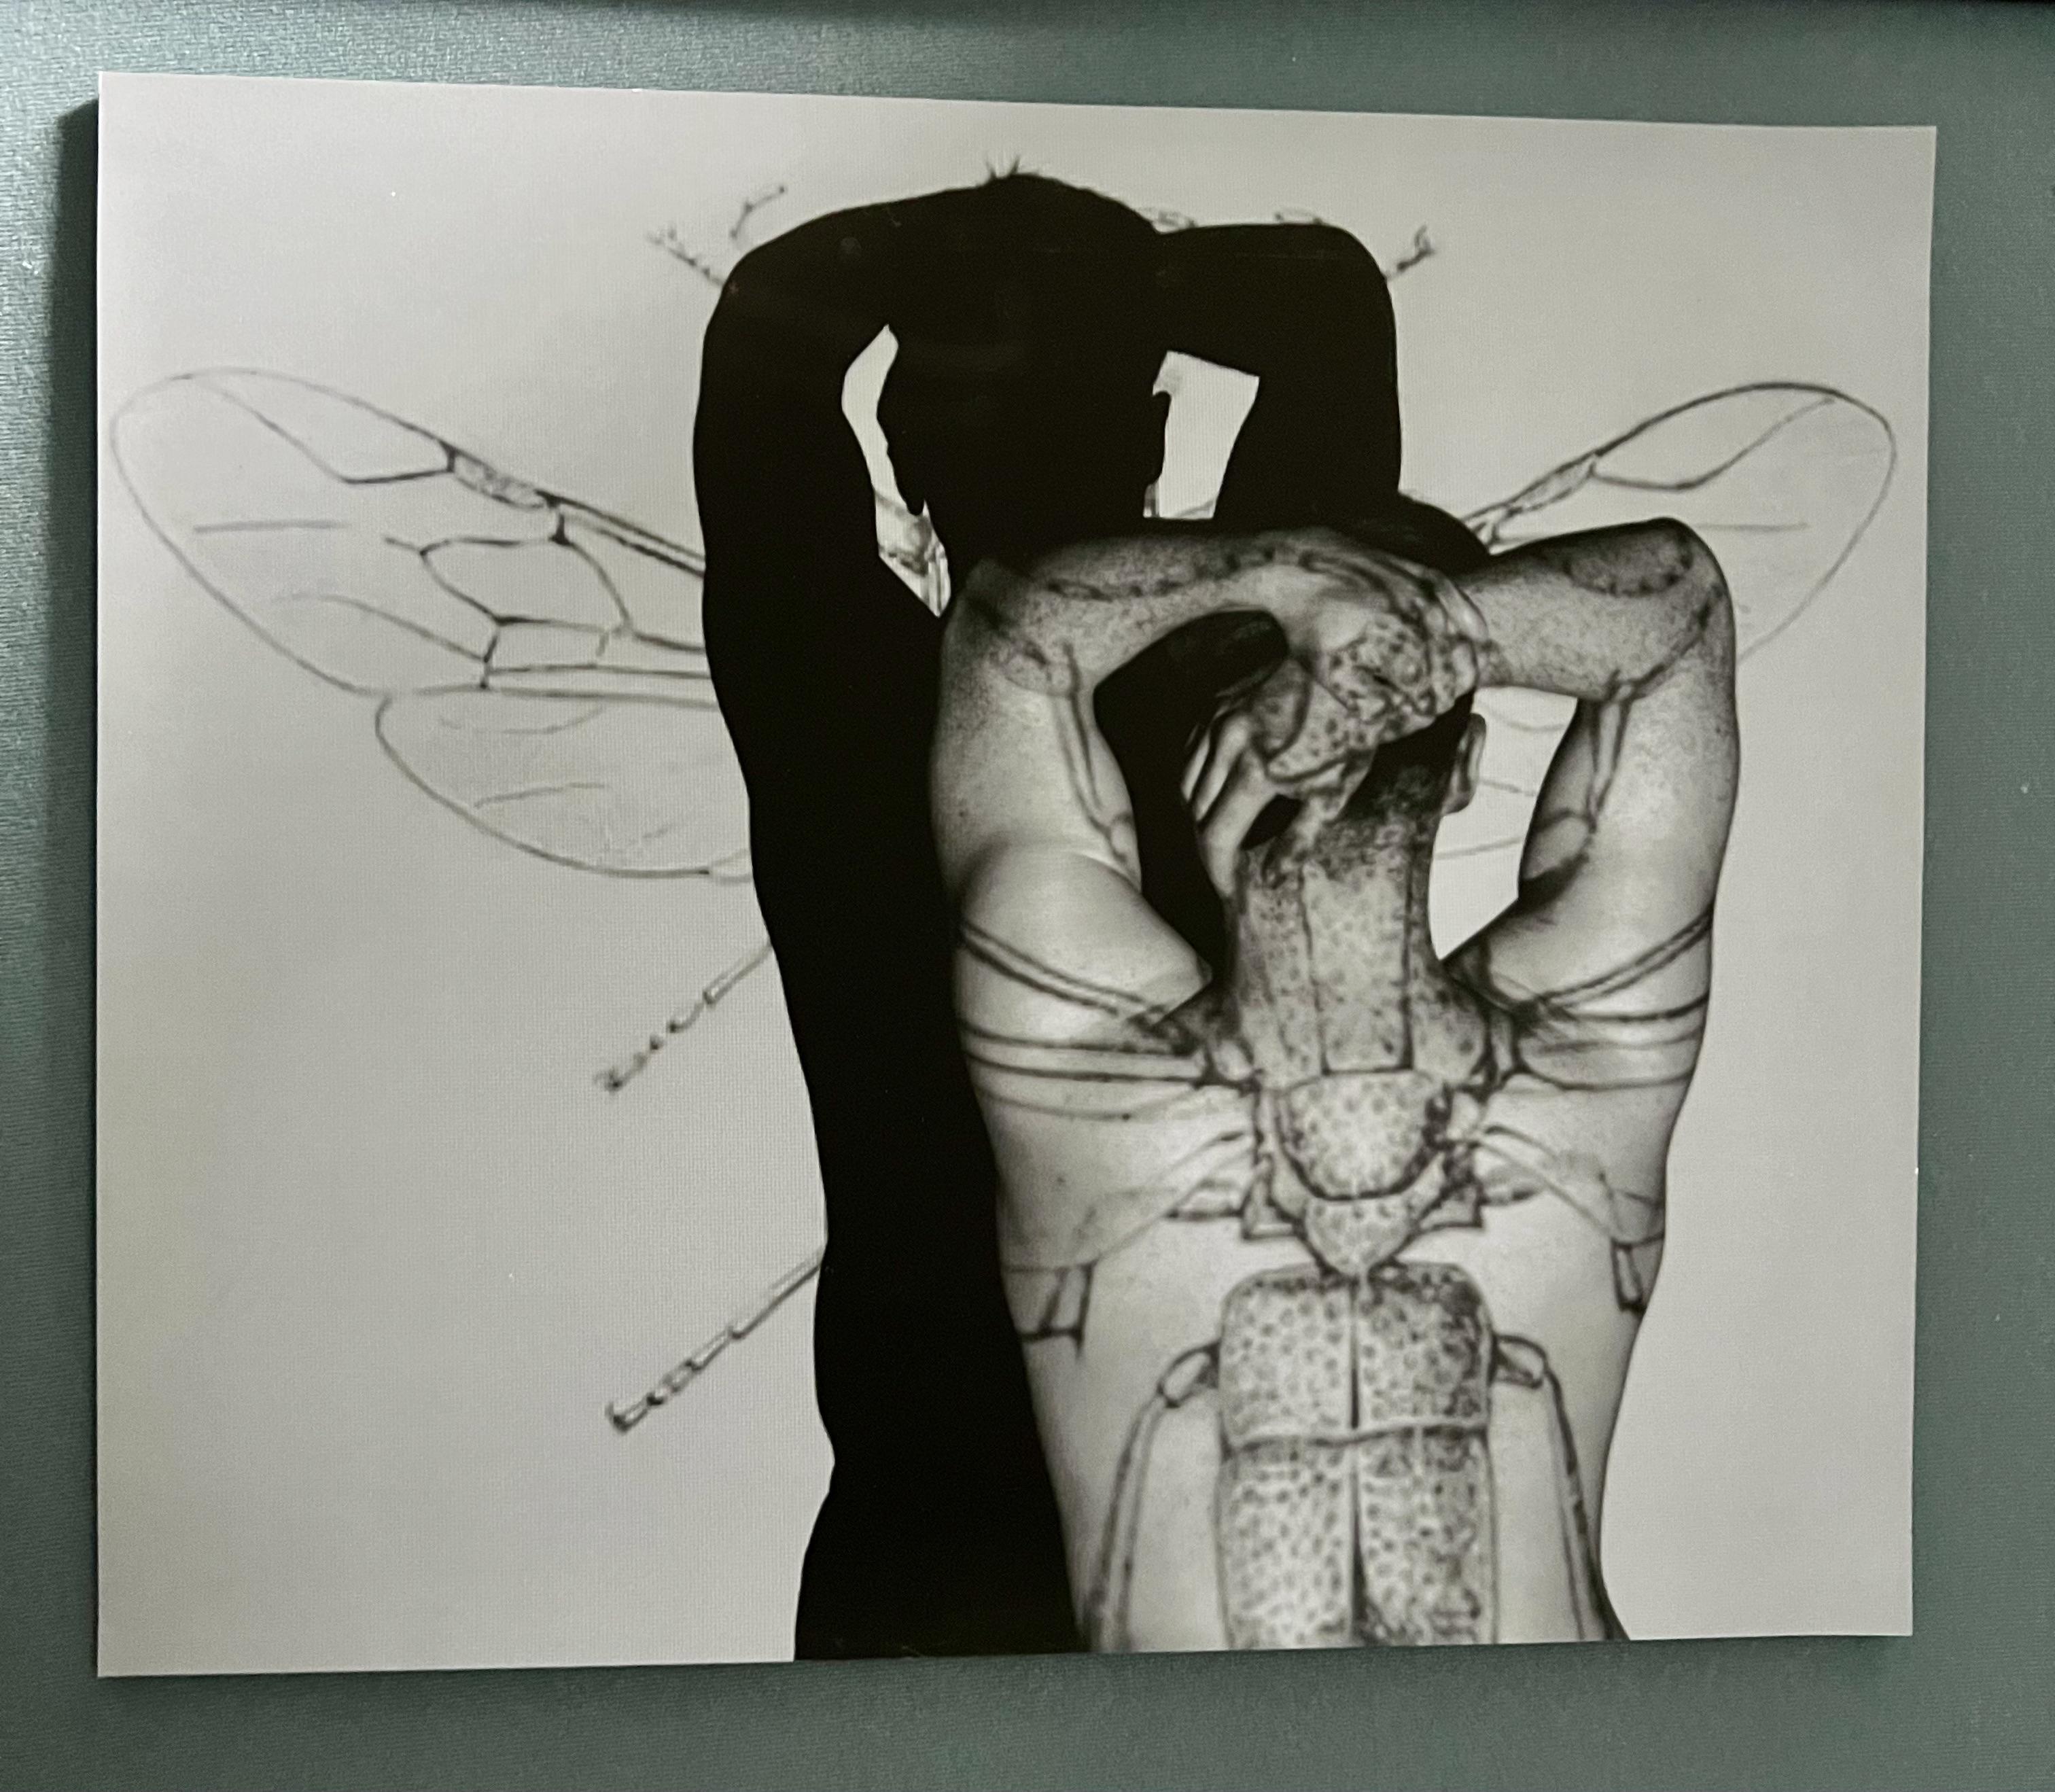 A black and white photographic image of an insect, which has been projected onto a man's bare back